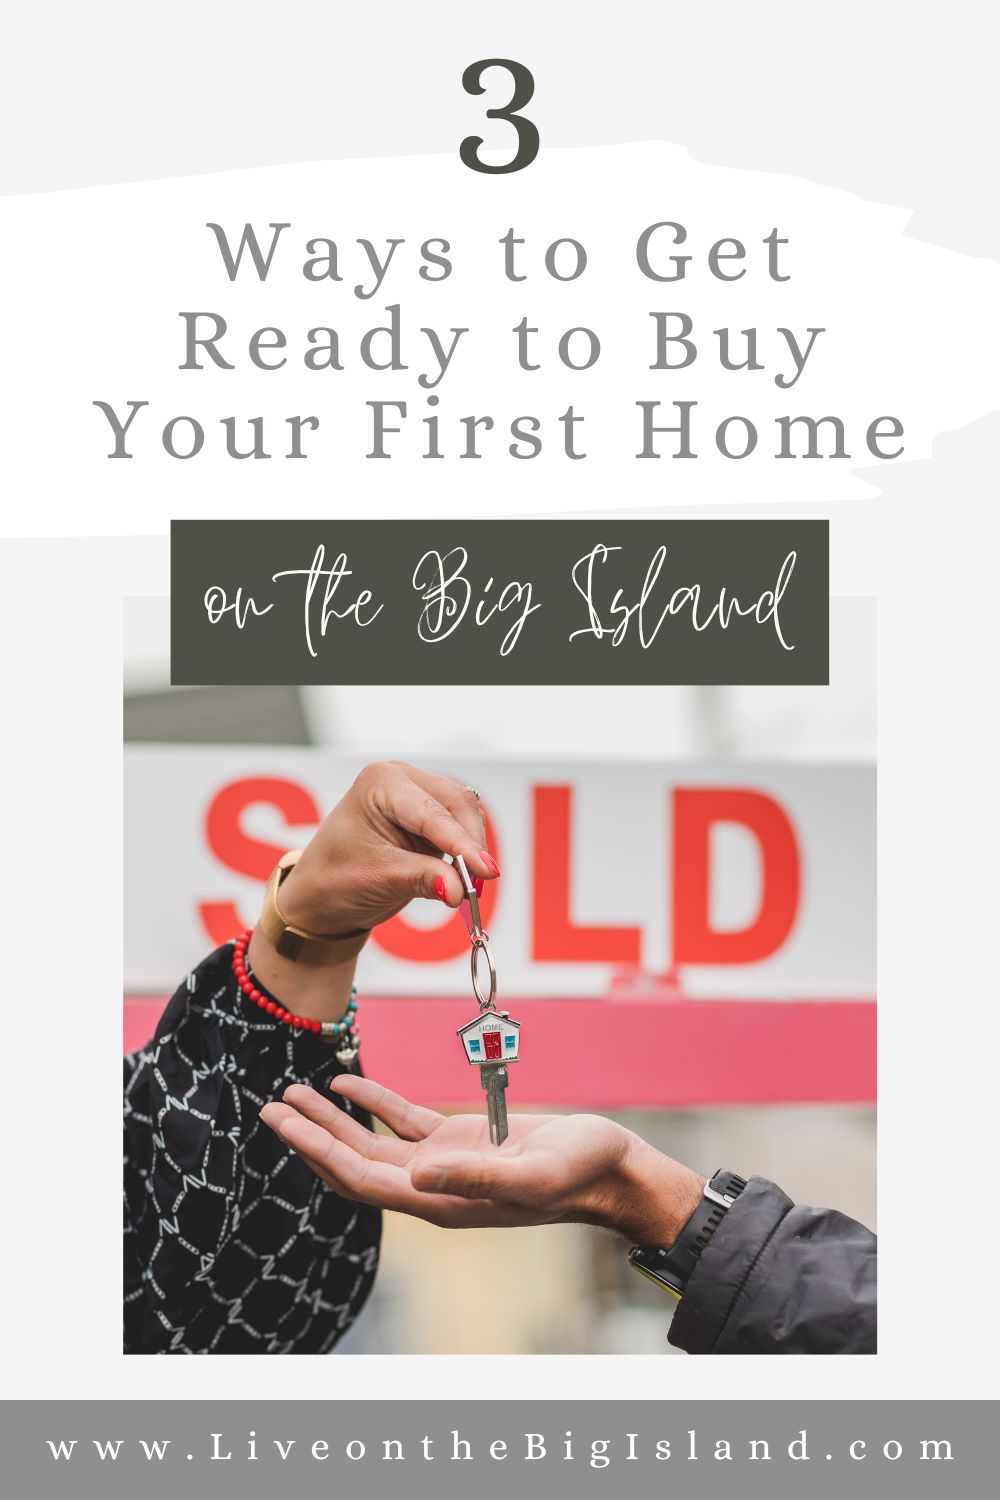 Buy Your First Home